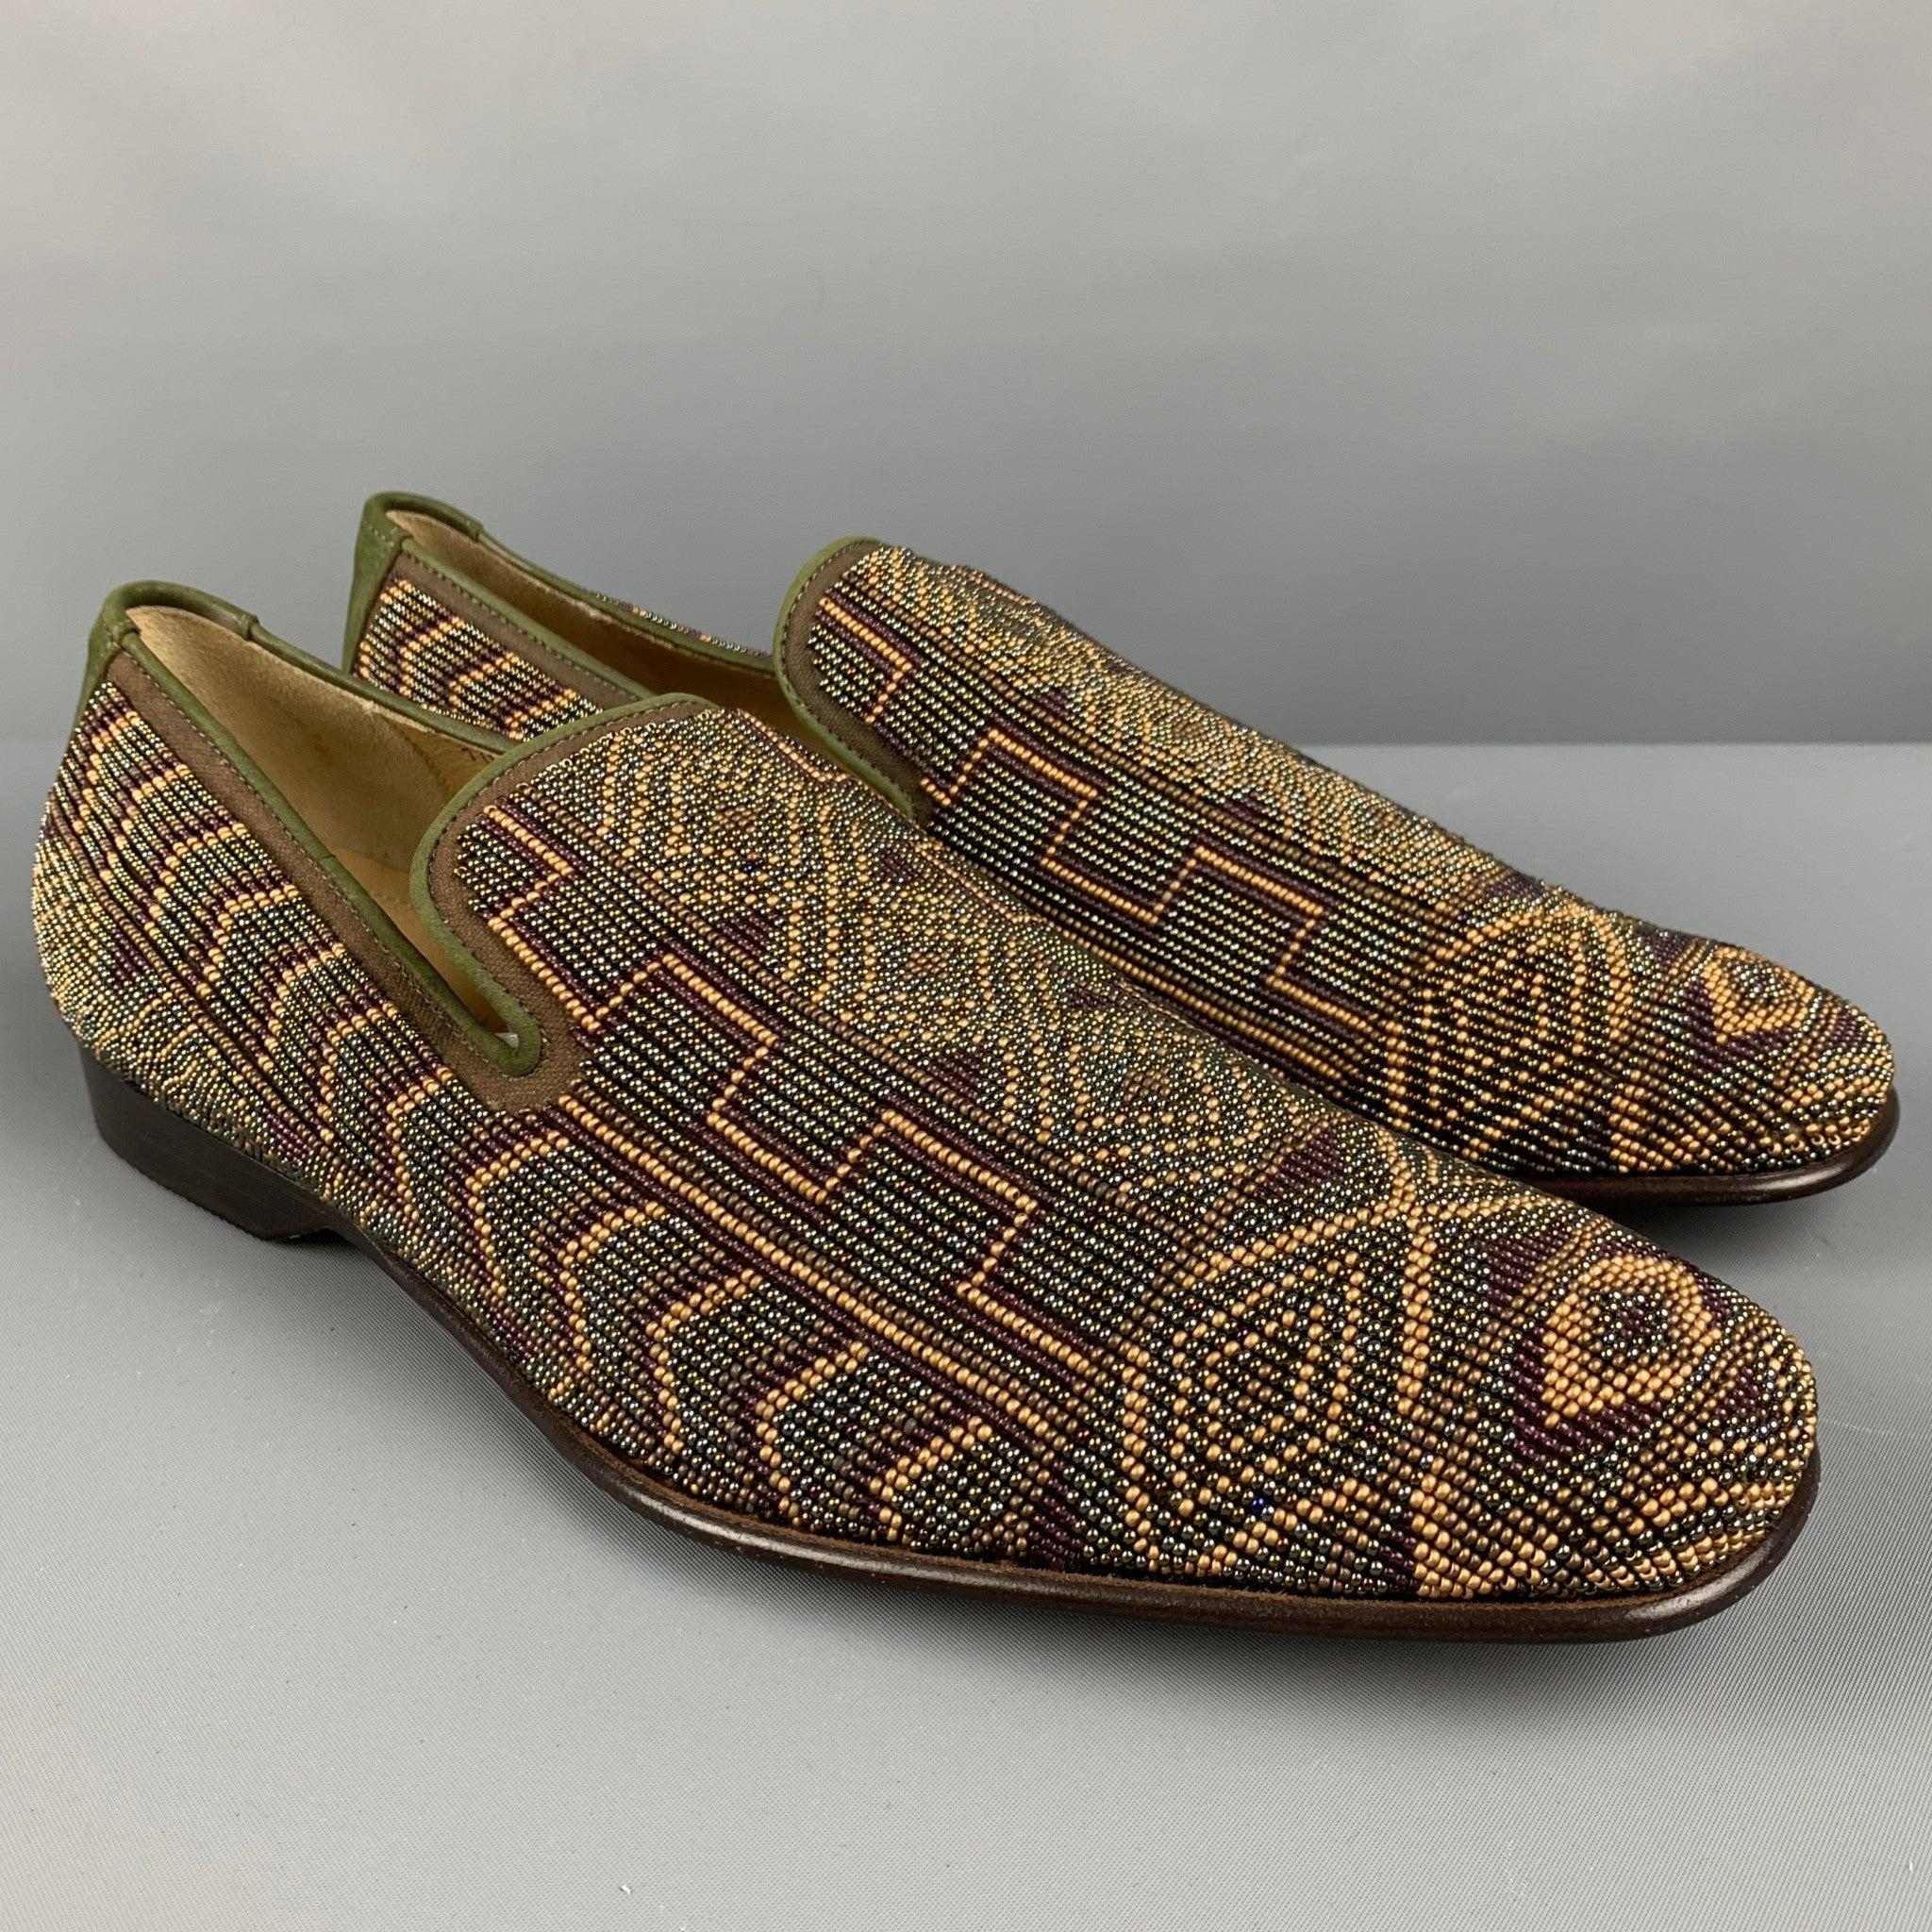 DONALD J PLINER loafers in an olive green leather featuring an all over tribal beaded pattern, and slip on style. Made in Italy. Excellent Pre-Owned Condition. 

Marked:   10Outsole: 12 inches  x 4 inches 
  
  
 
Reference: 126930
Category: